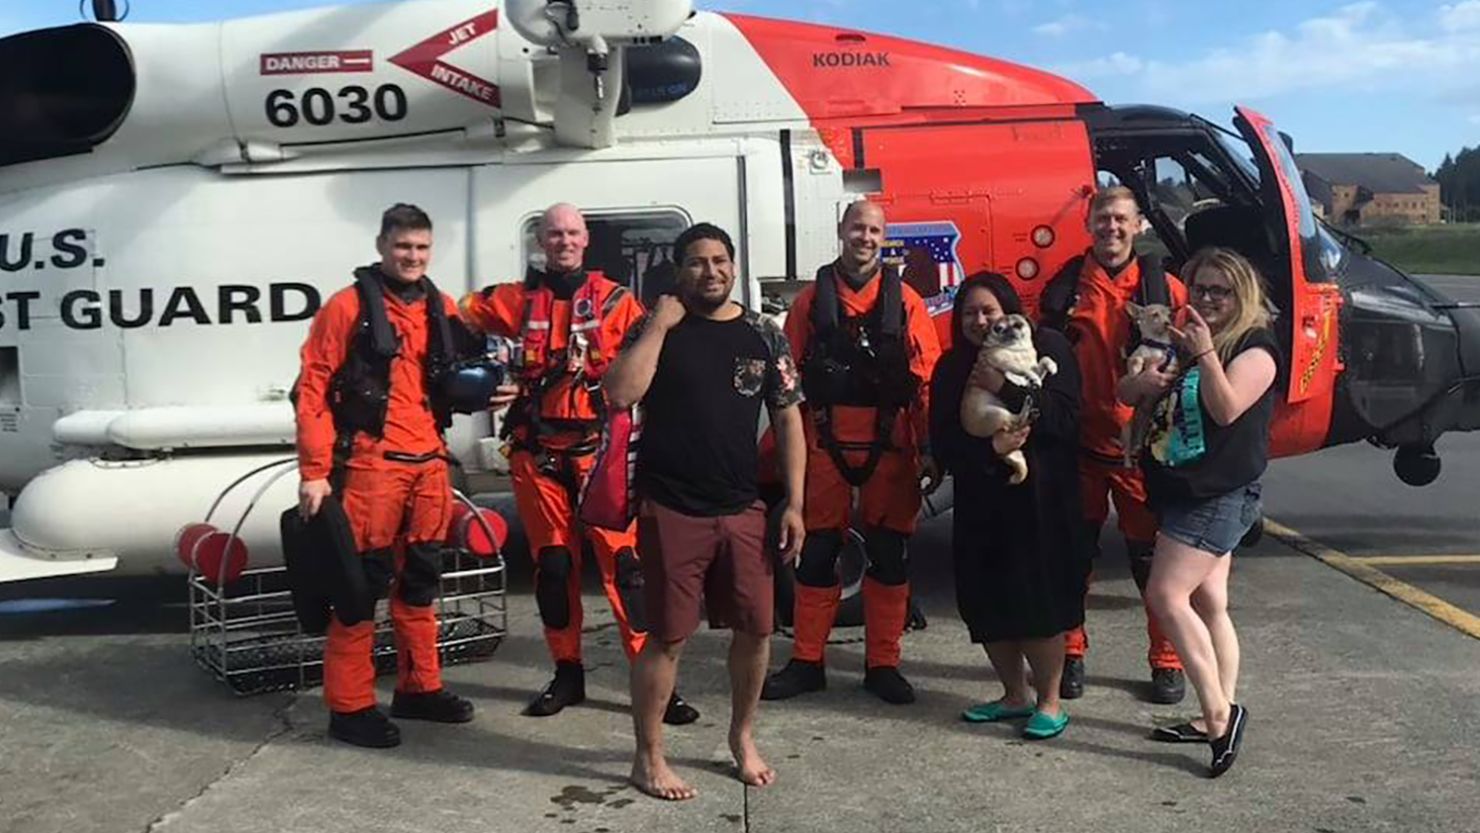 The Coast Guard rescued the group after their inflatable float was pulled out to the bay.